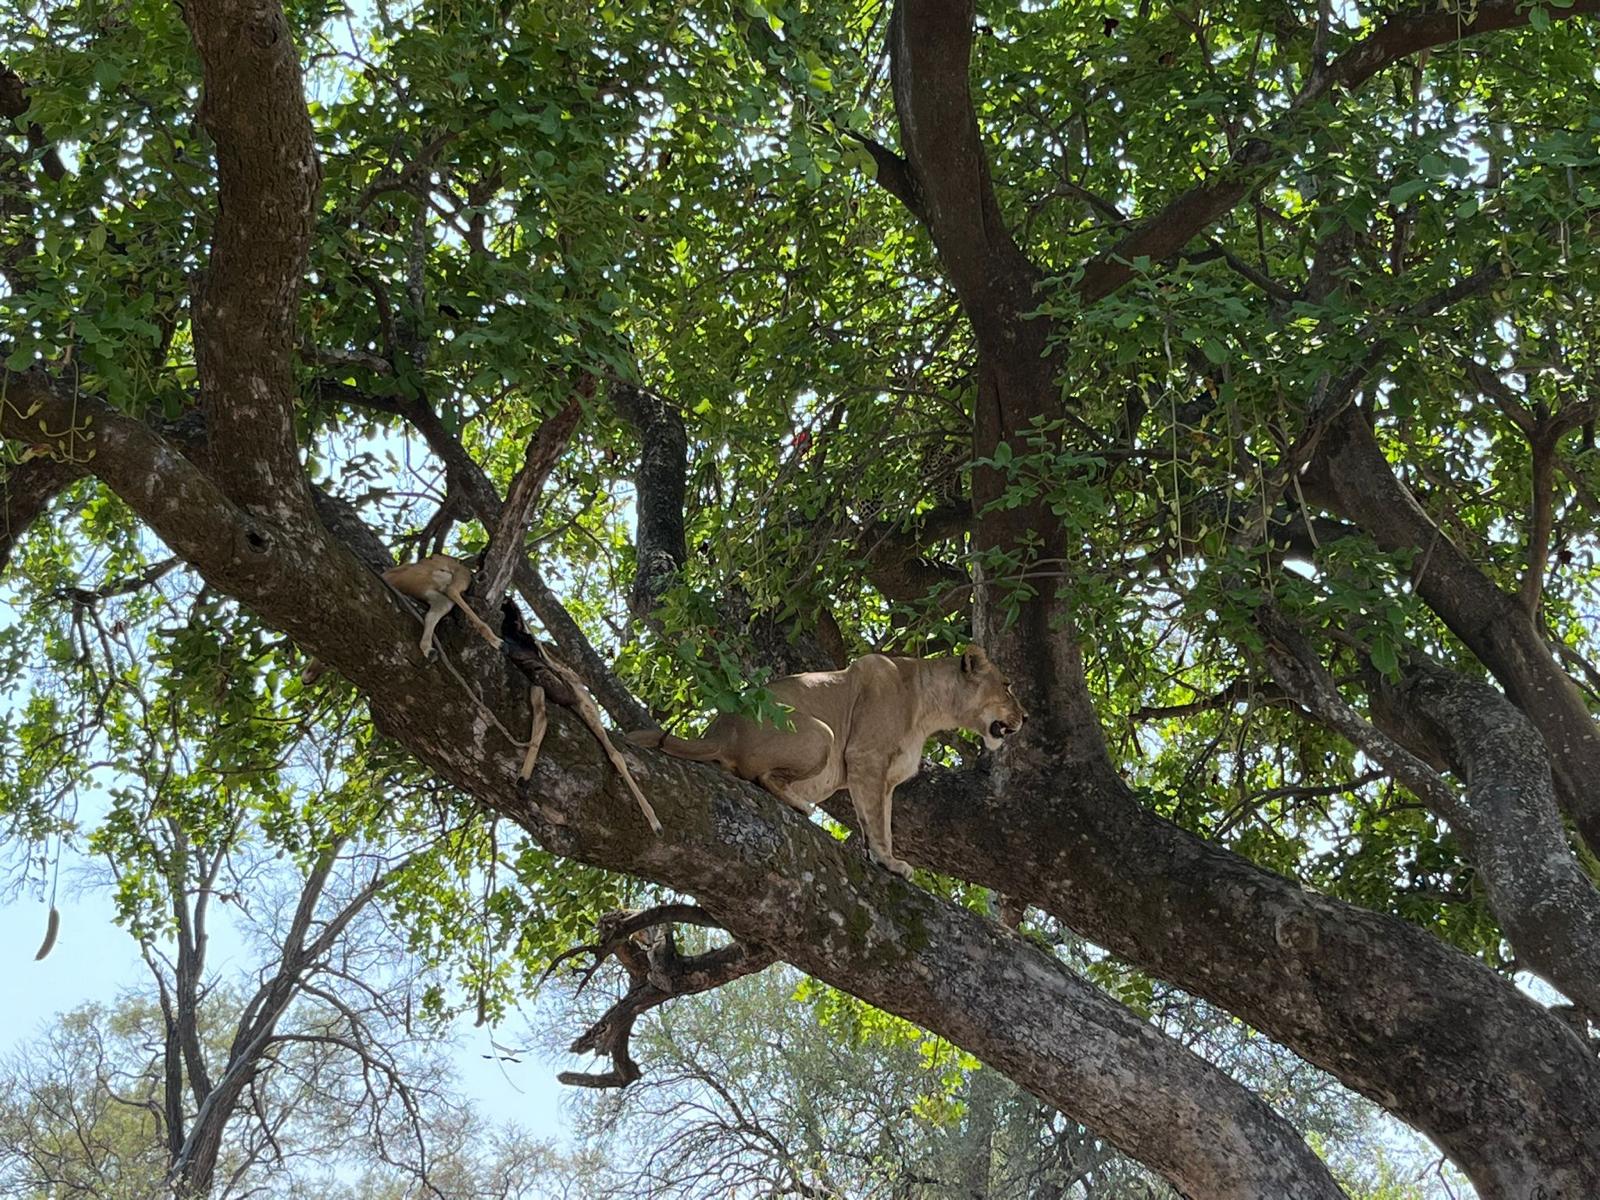 Lion climbing tree with leopard in background